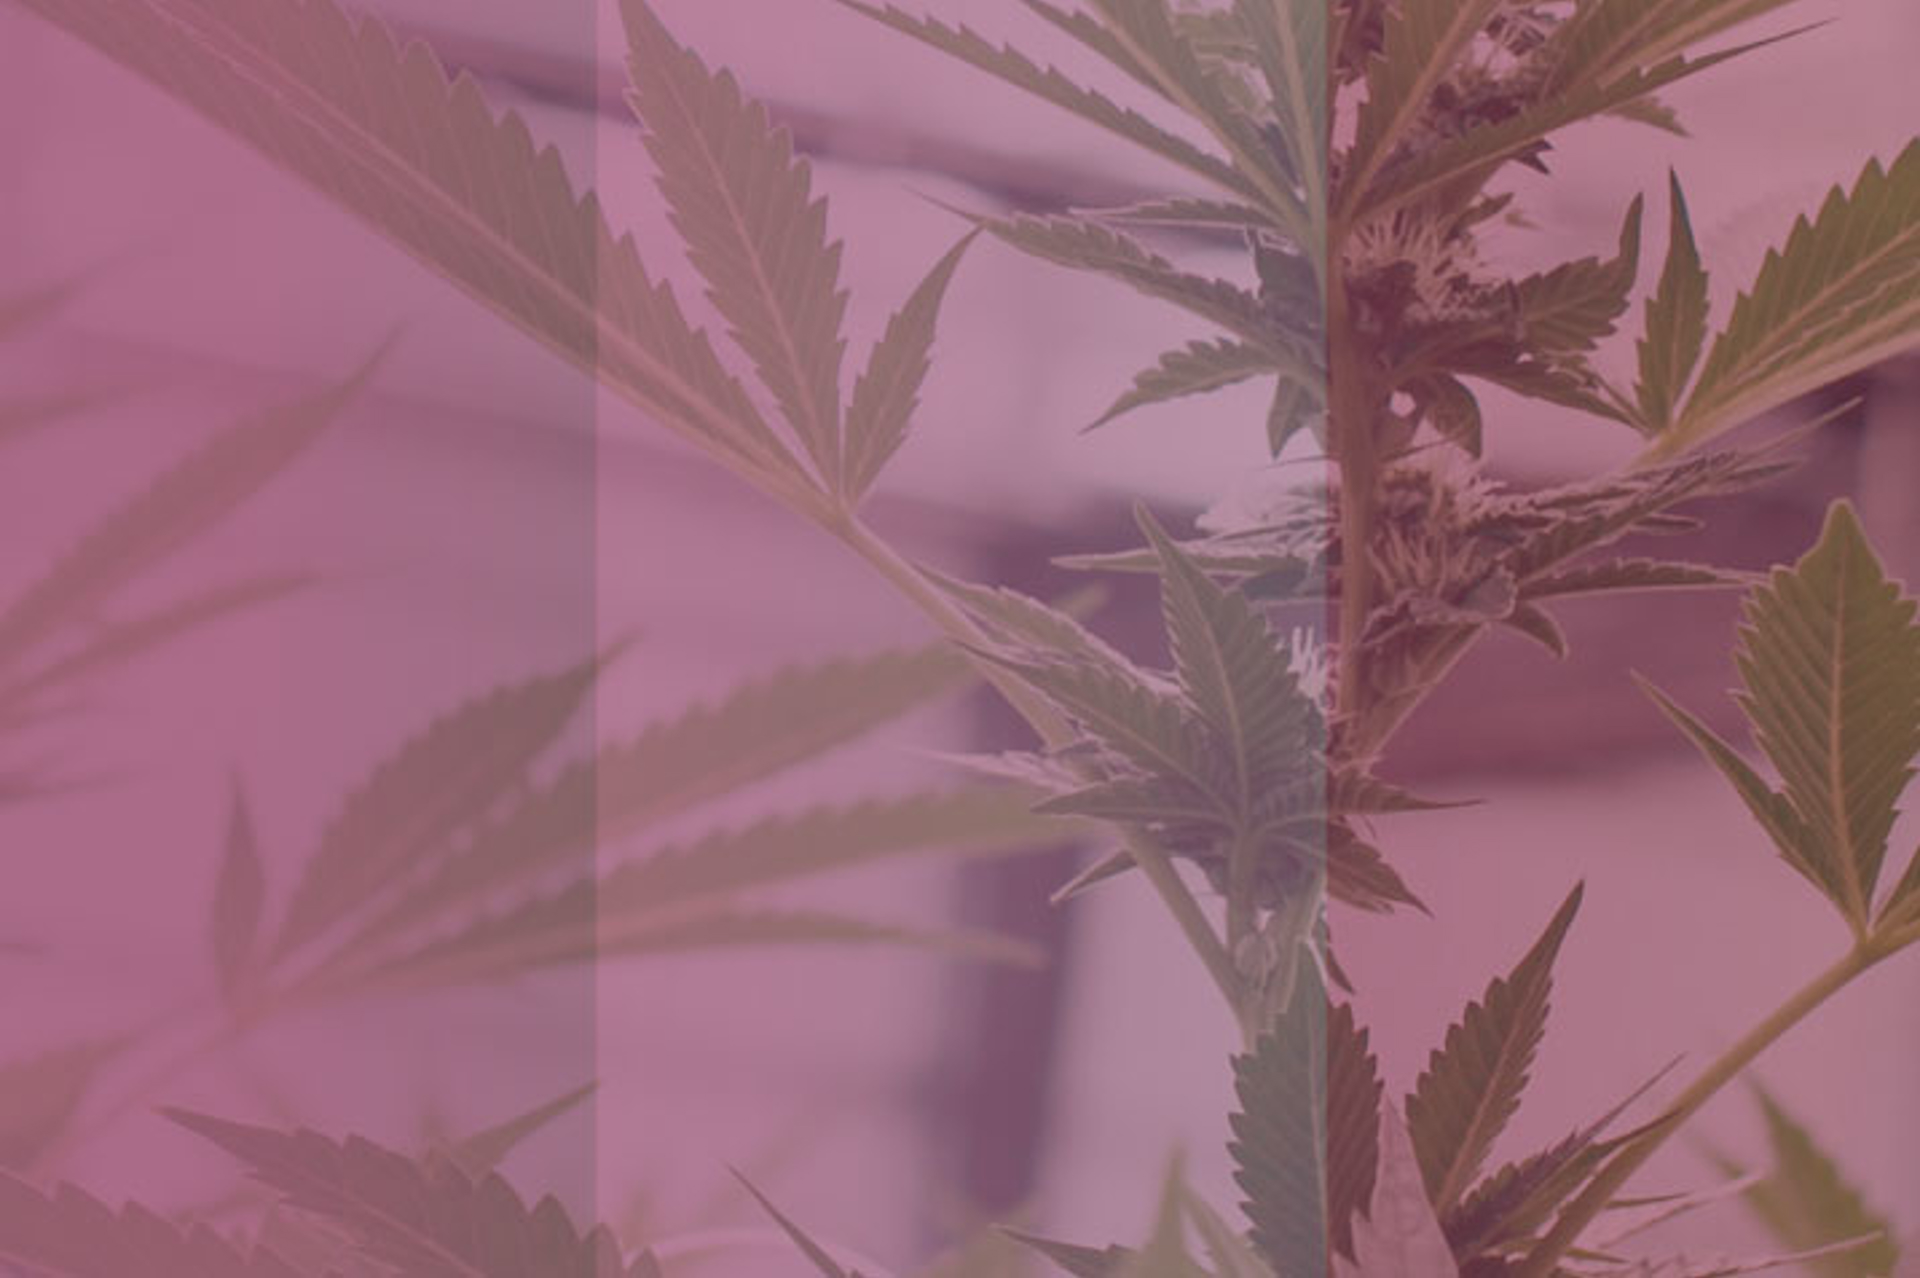 Greenhouse Cannabis Cultivation in Italy: Regulations and Opportunities